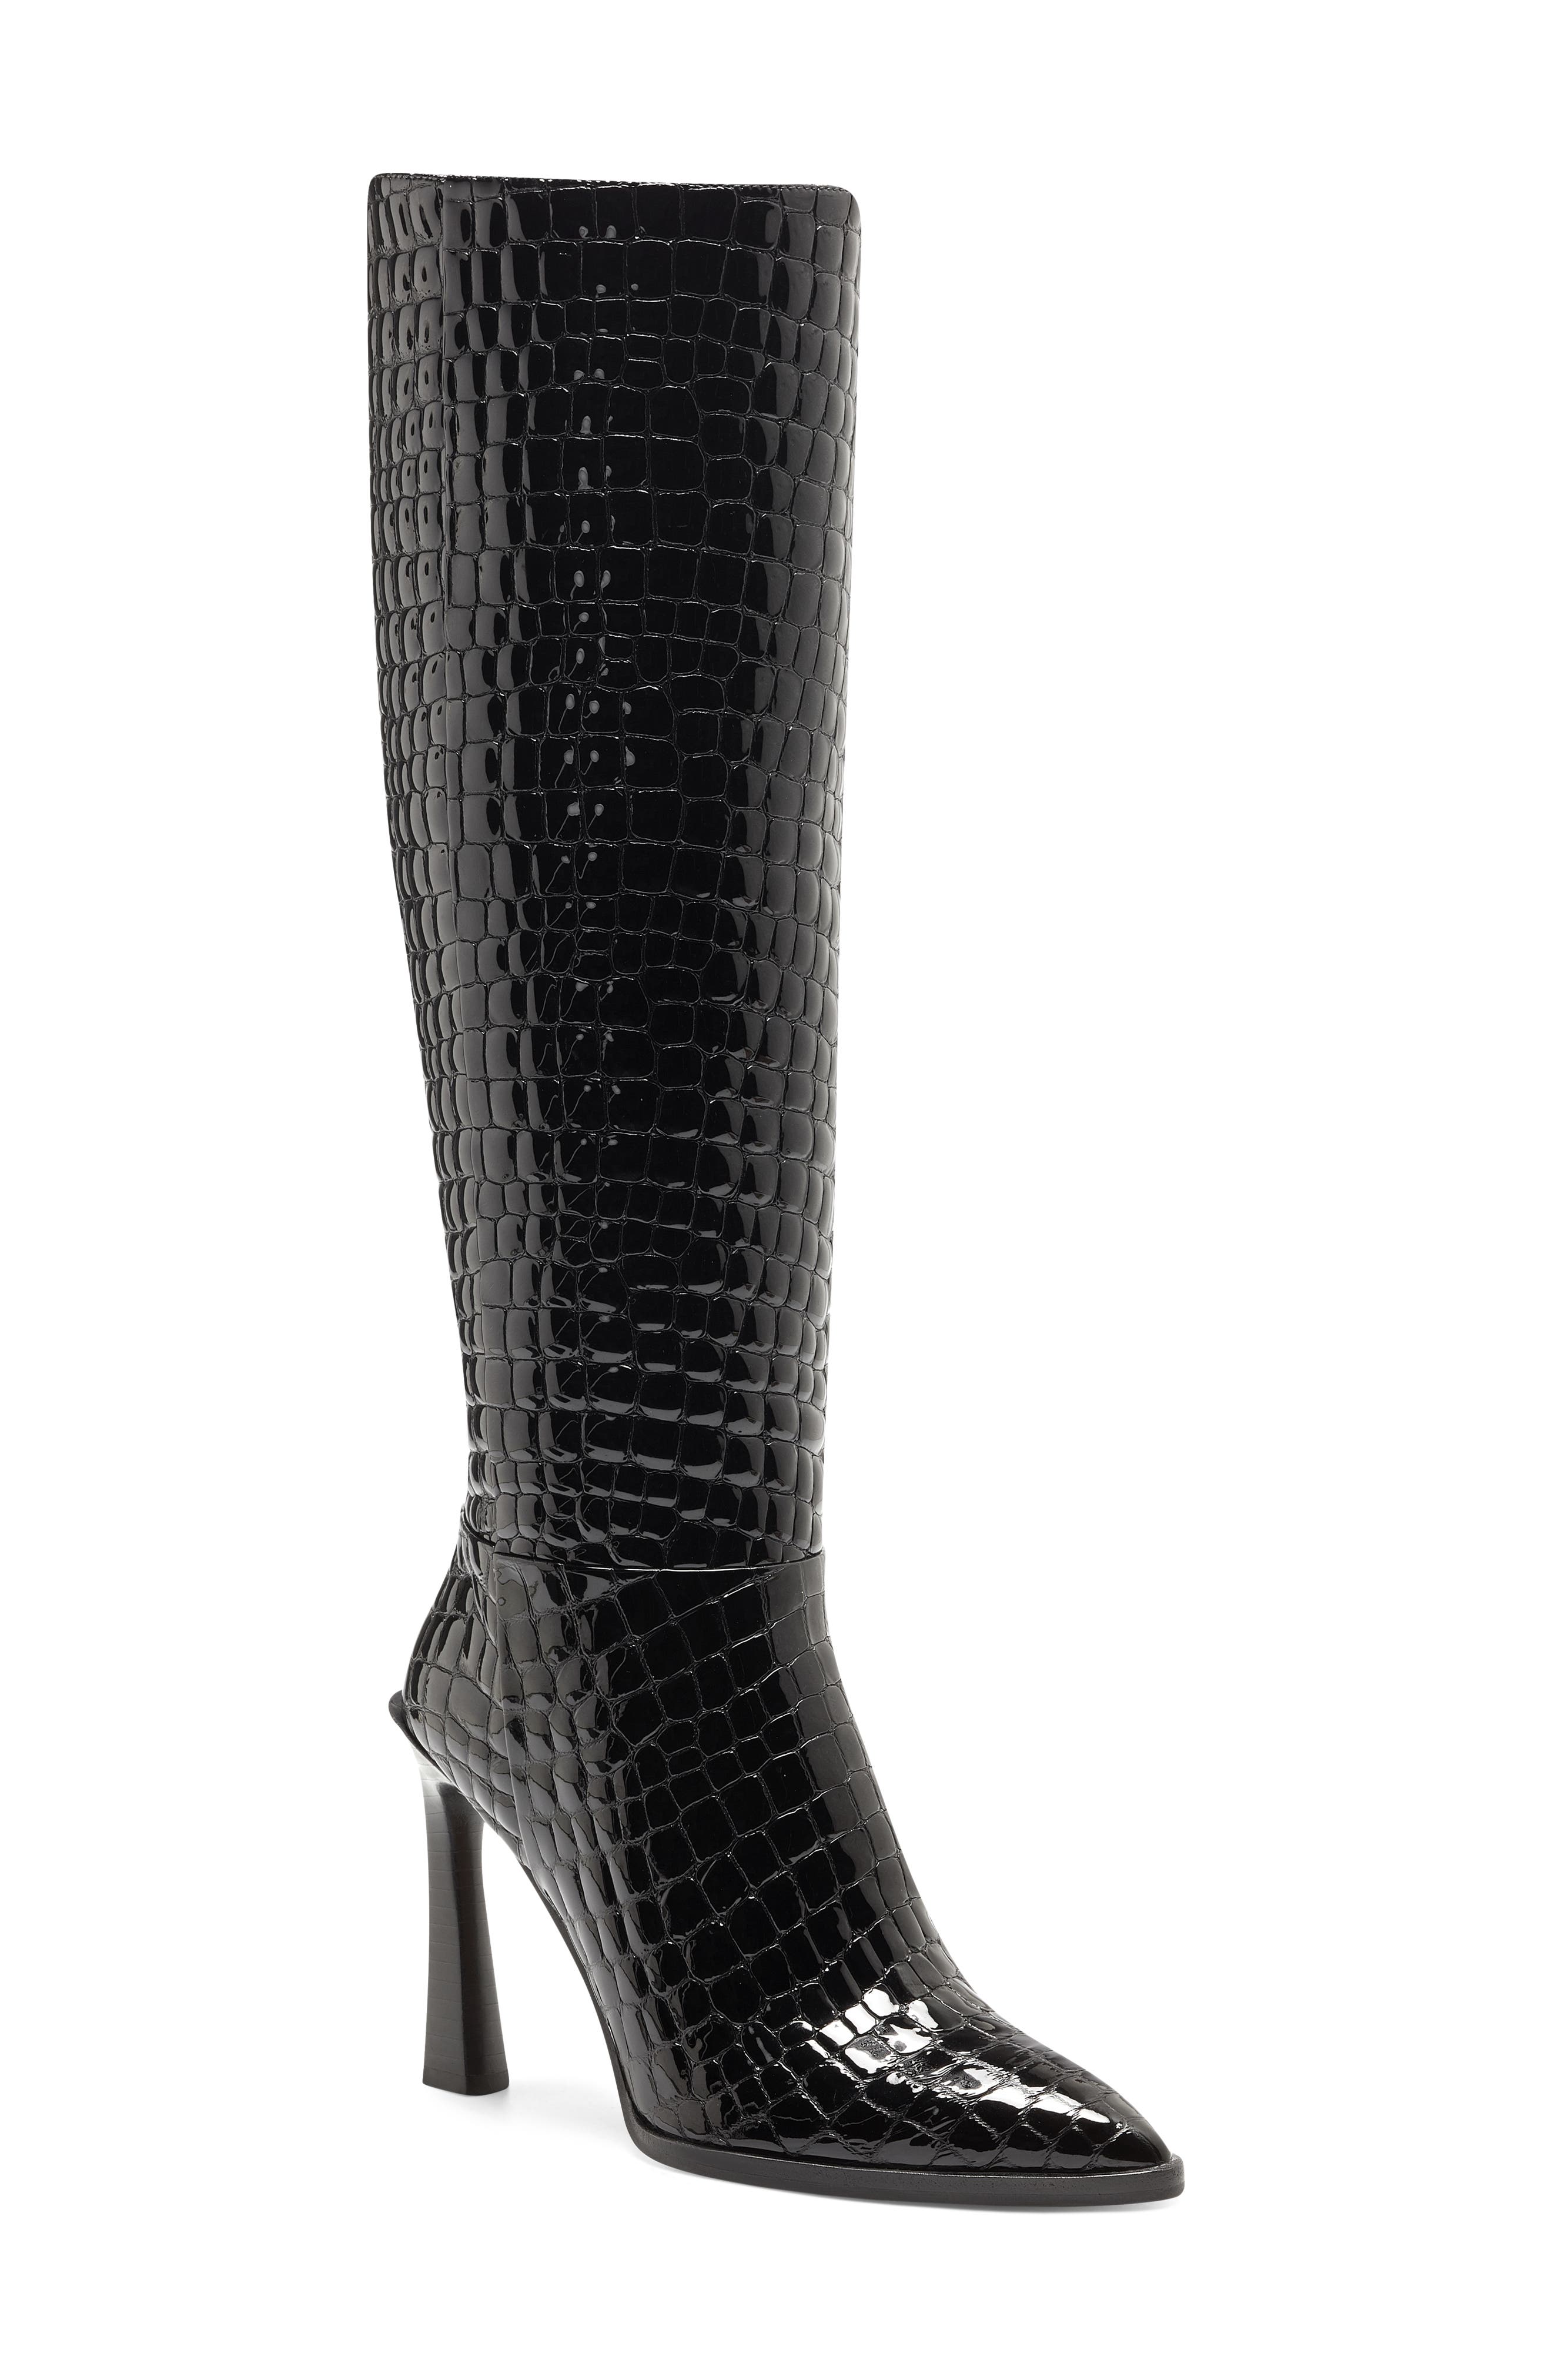 VINCE CAMUTO PELSNA KNEE HIGH BOOT,194307359876